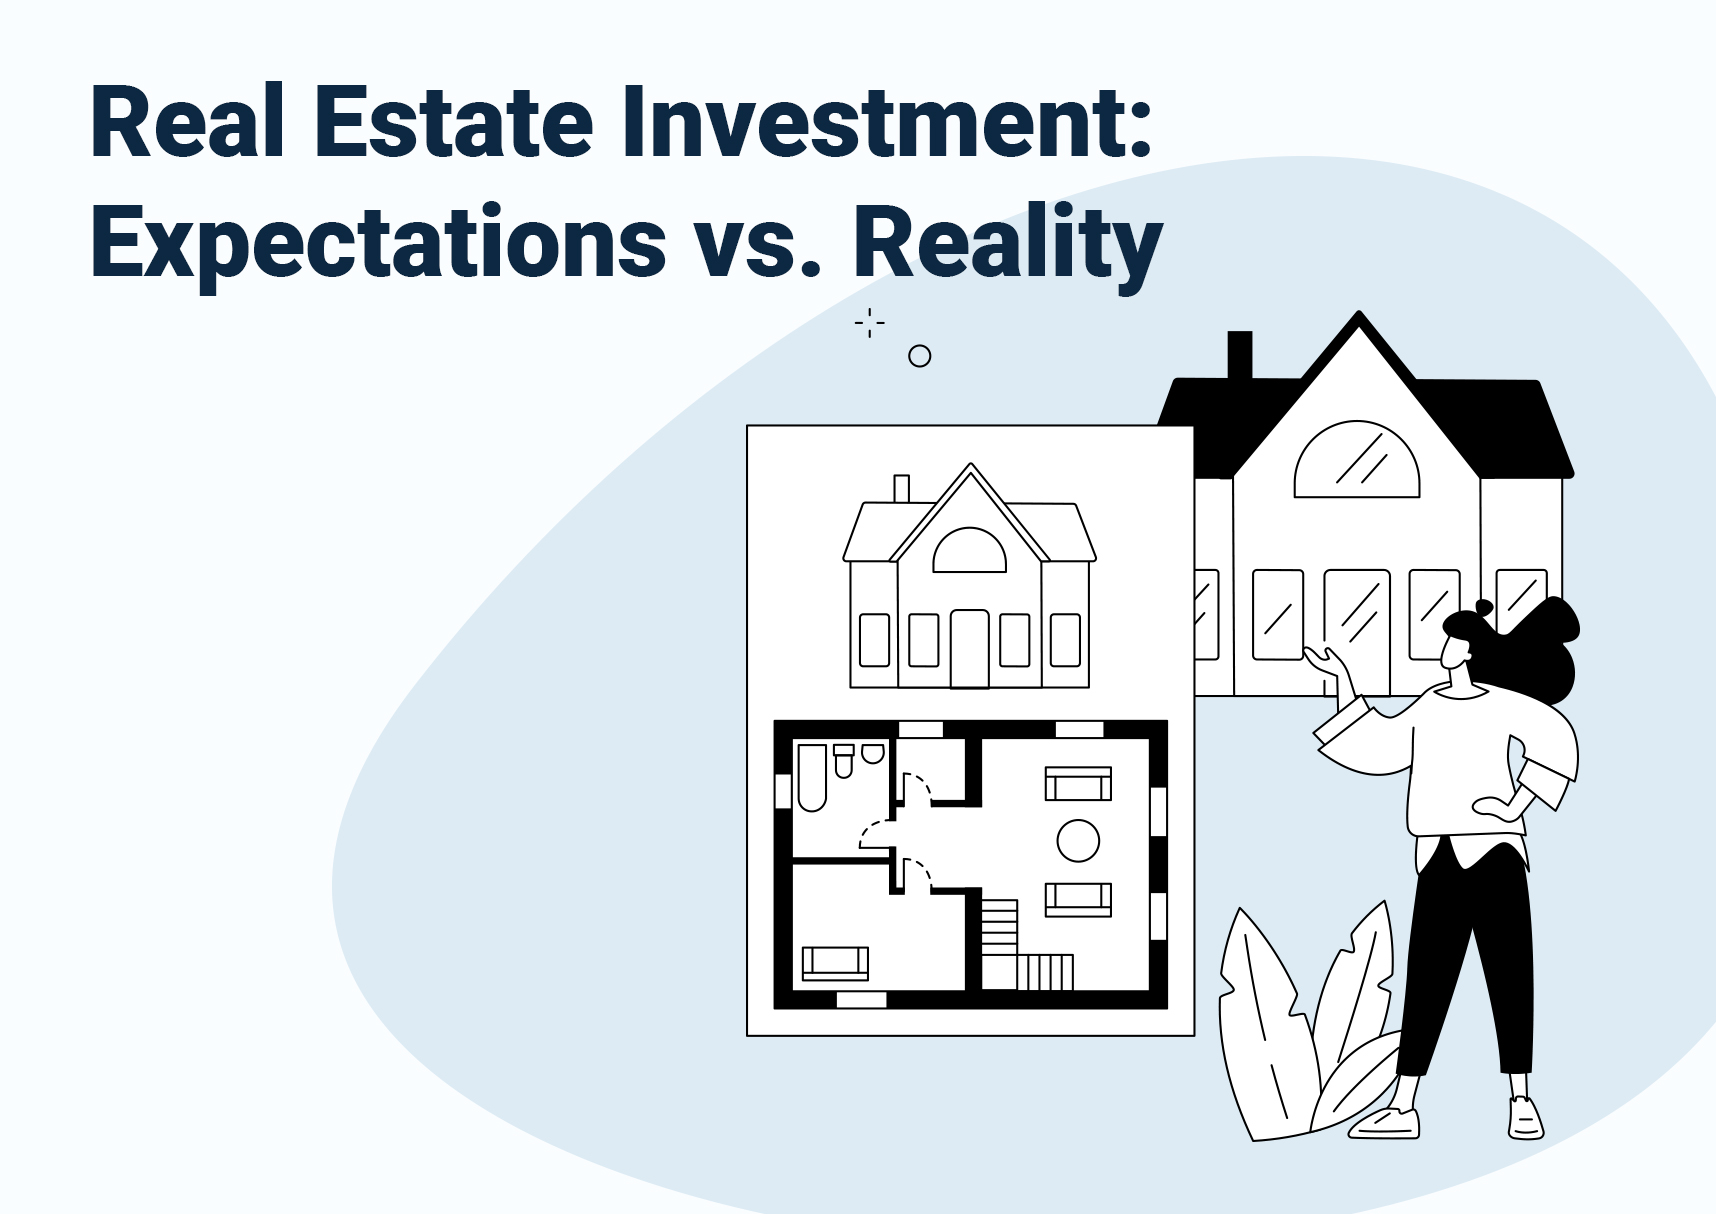 Real Estate Investment: Expectations vs. Reality